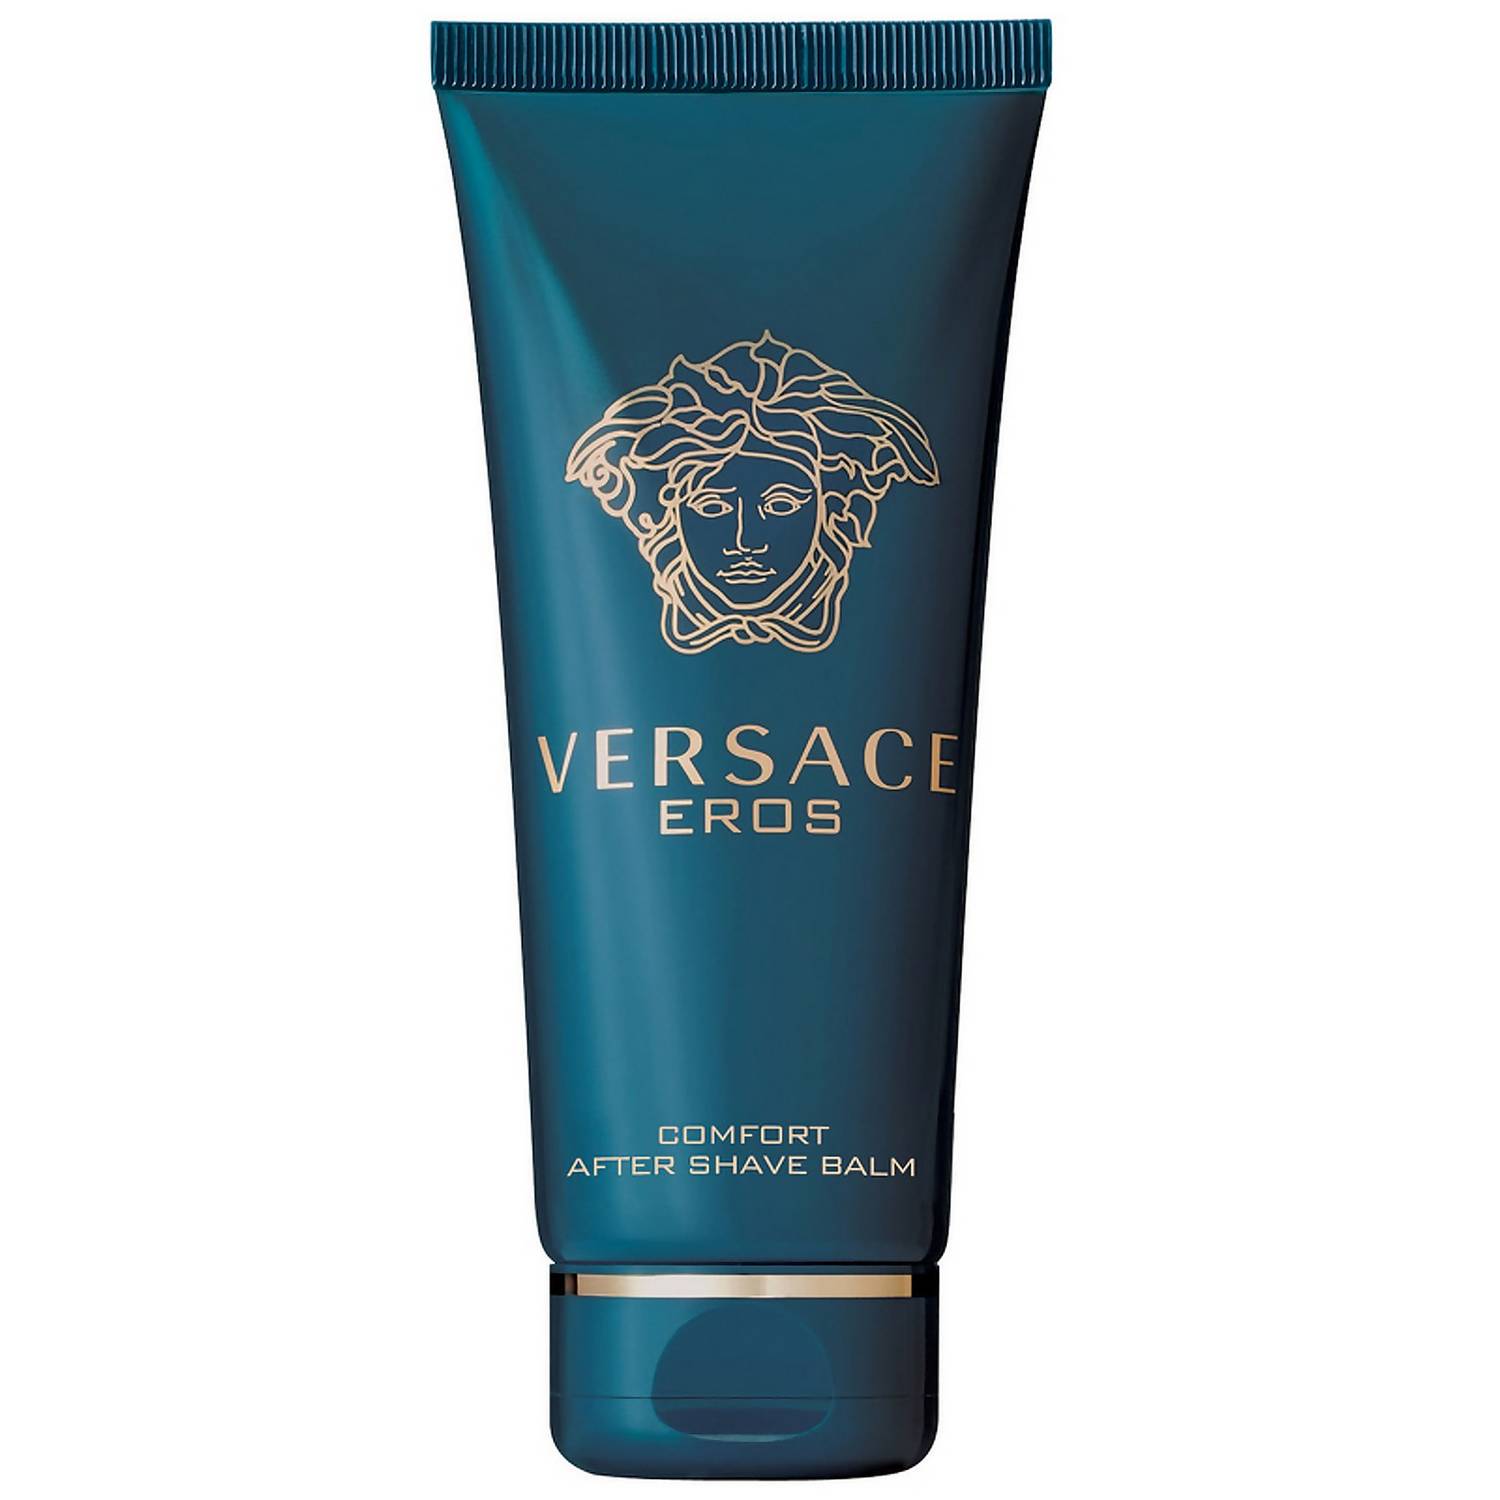 Lower Prices Versace Eros After Shave Balm 100ml - Lowest Prices Online